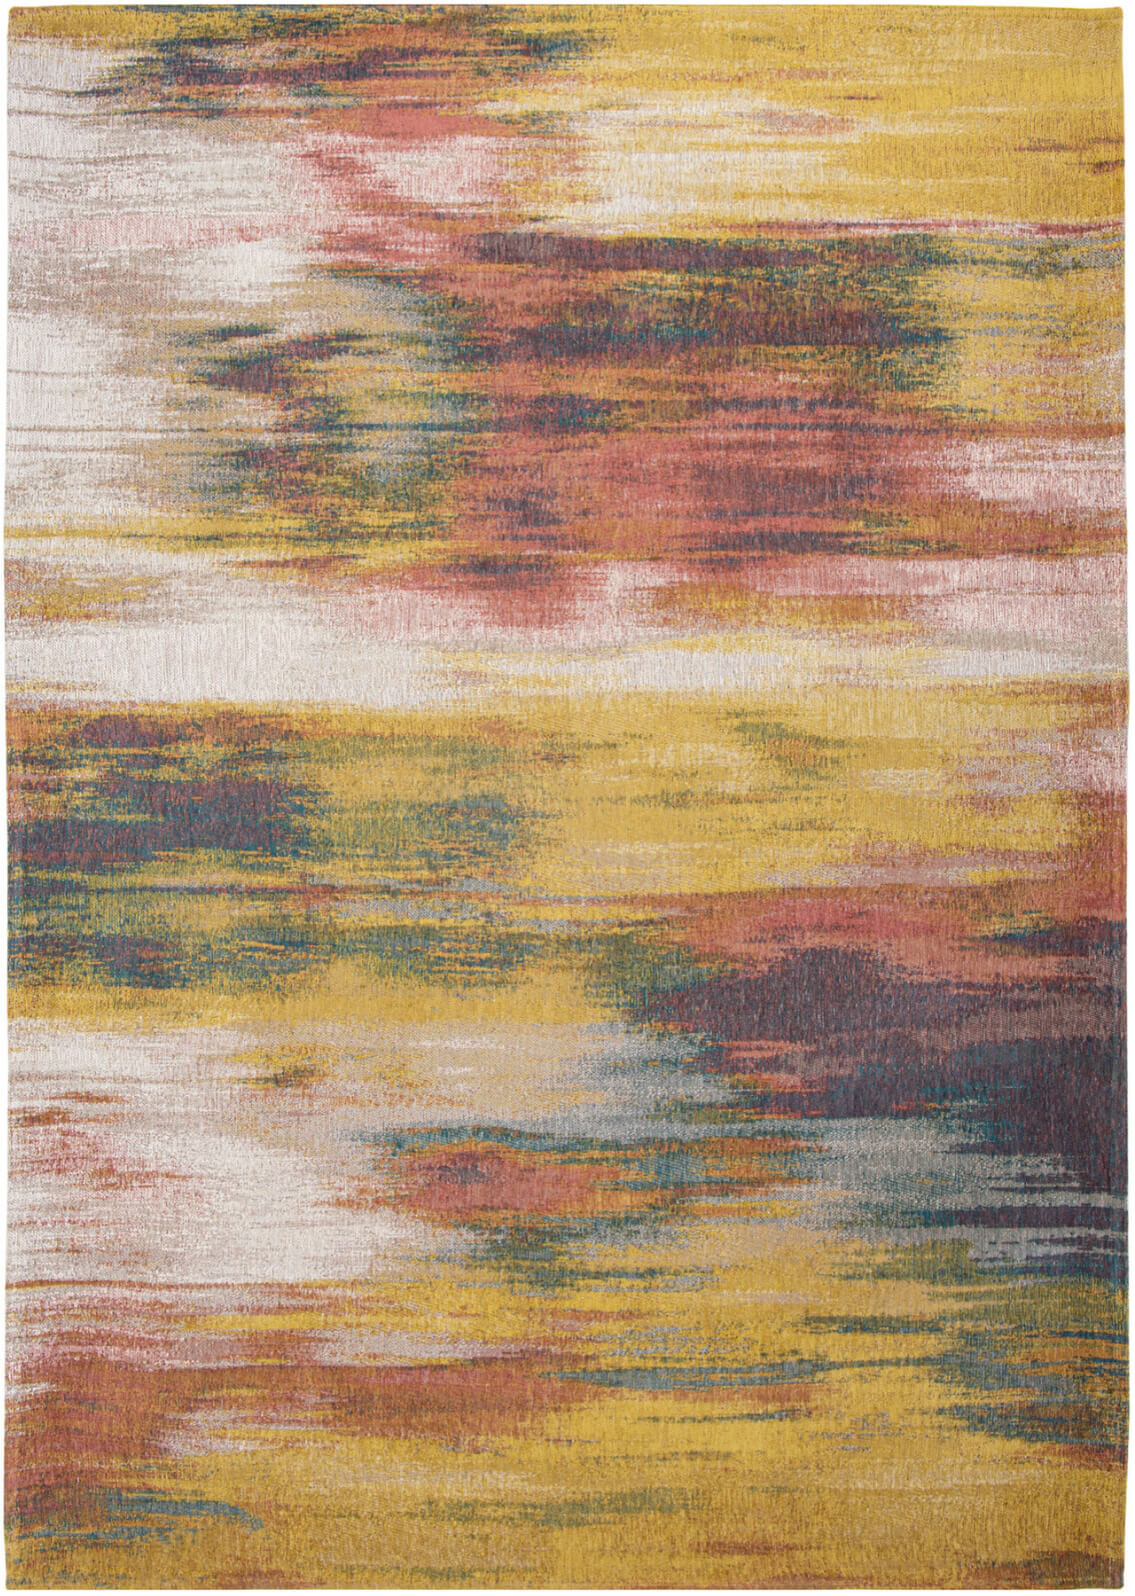 Abstract Flatwoven Mix Rug ☞ Size: 2' 7" x 5' (80 x 150 cm)